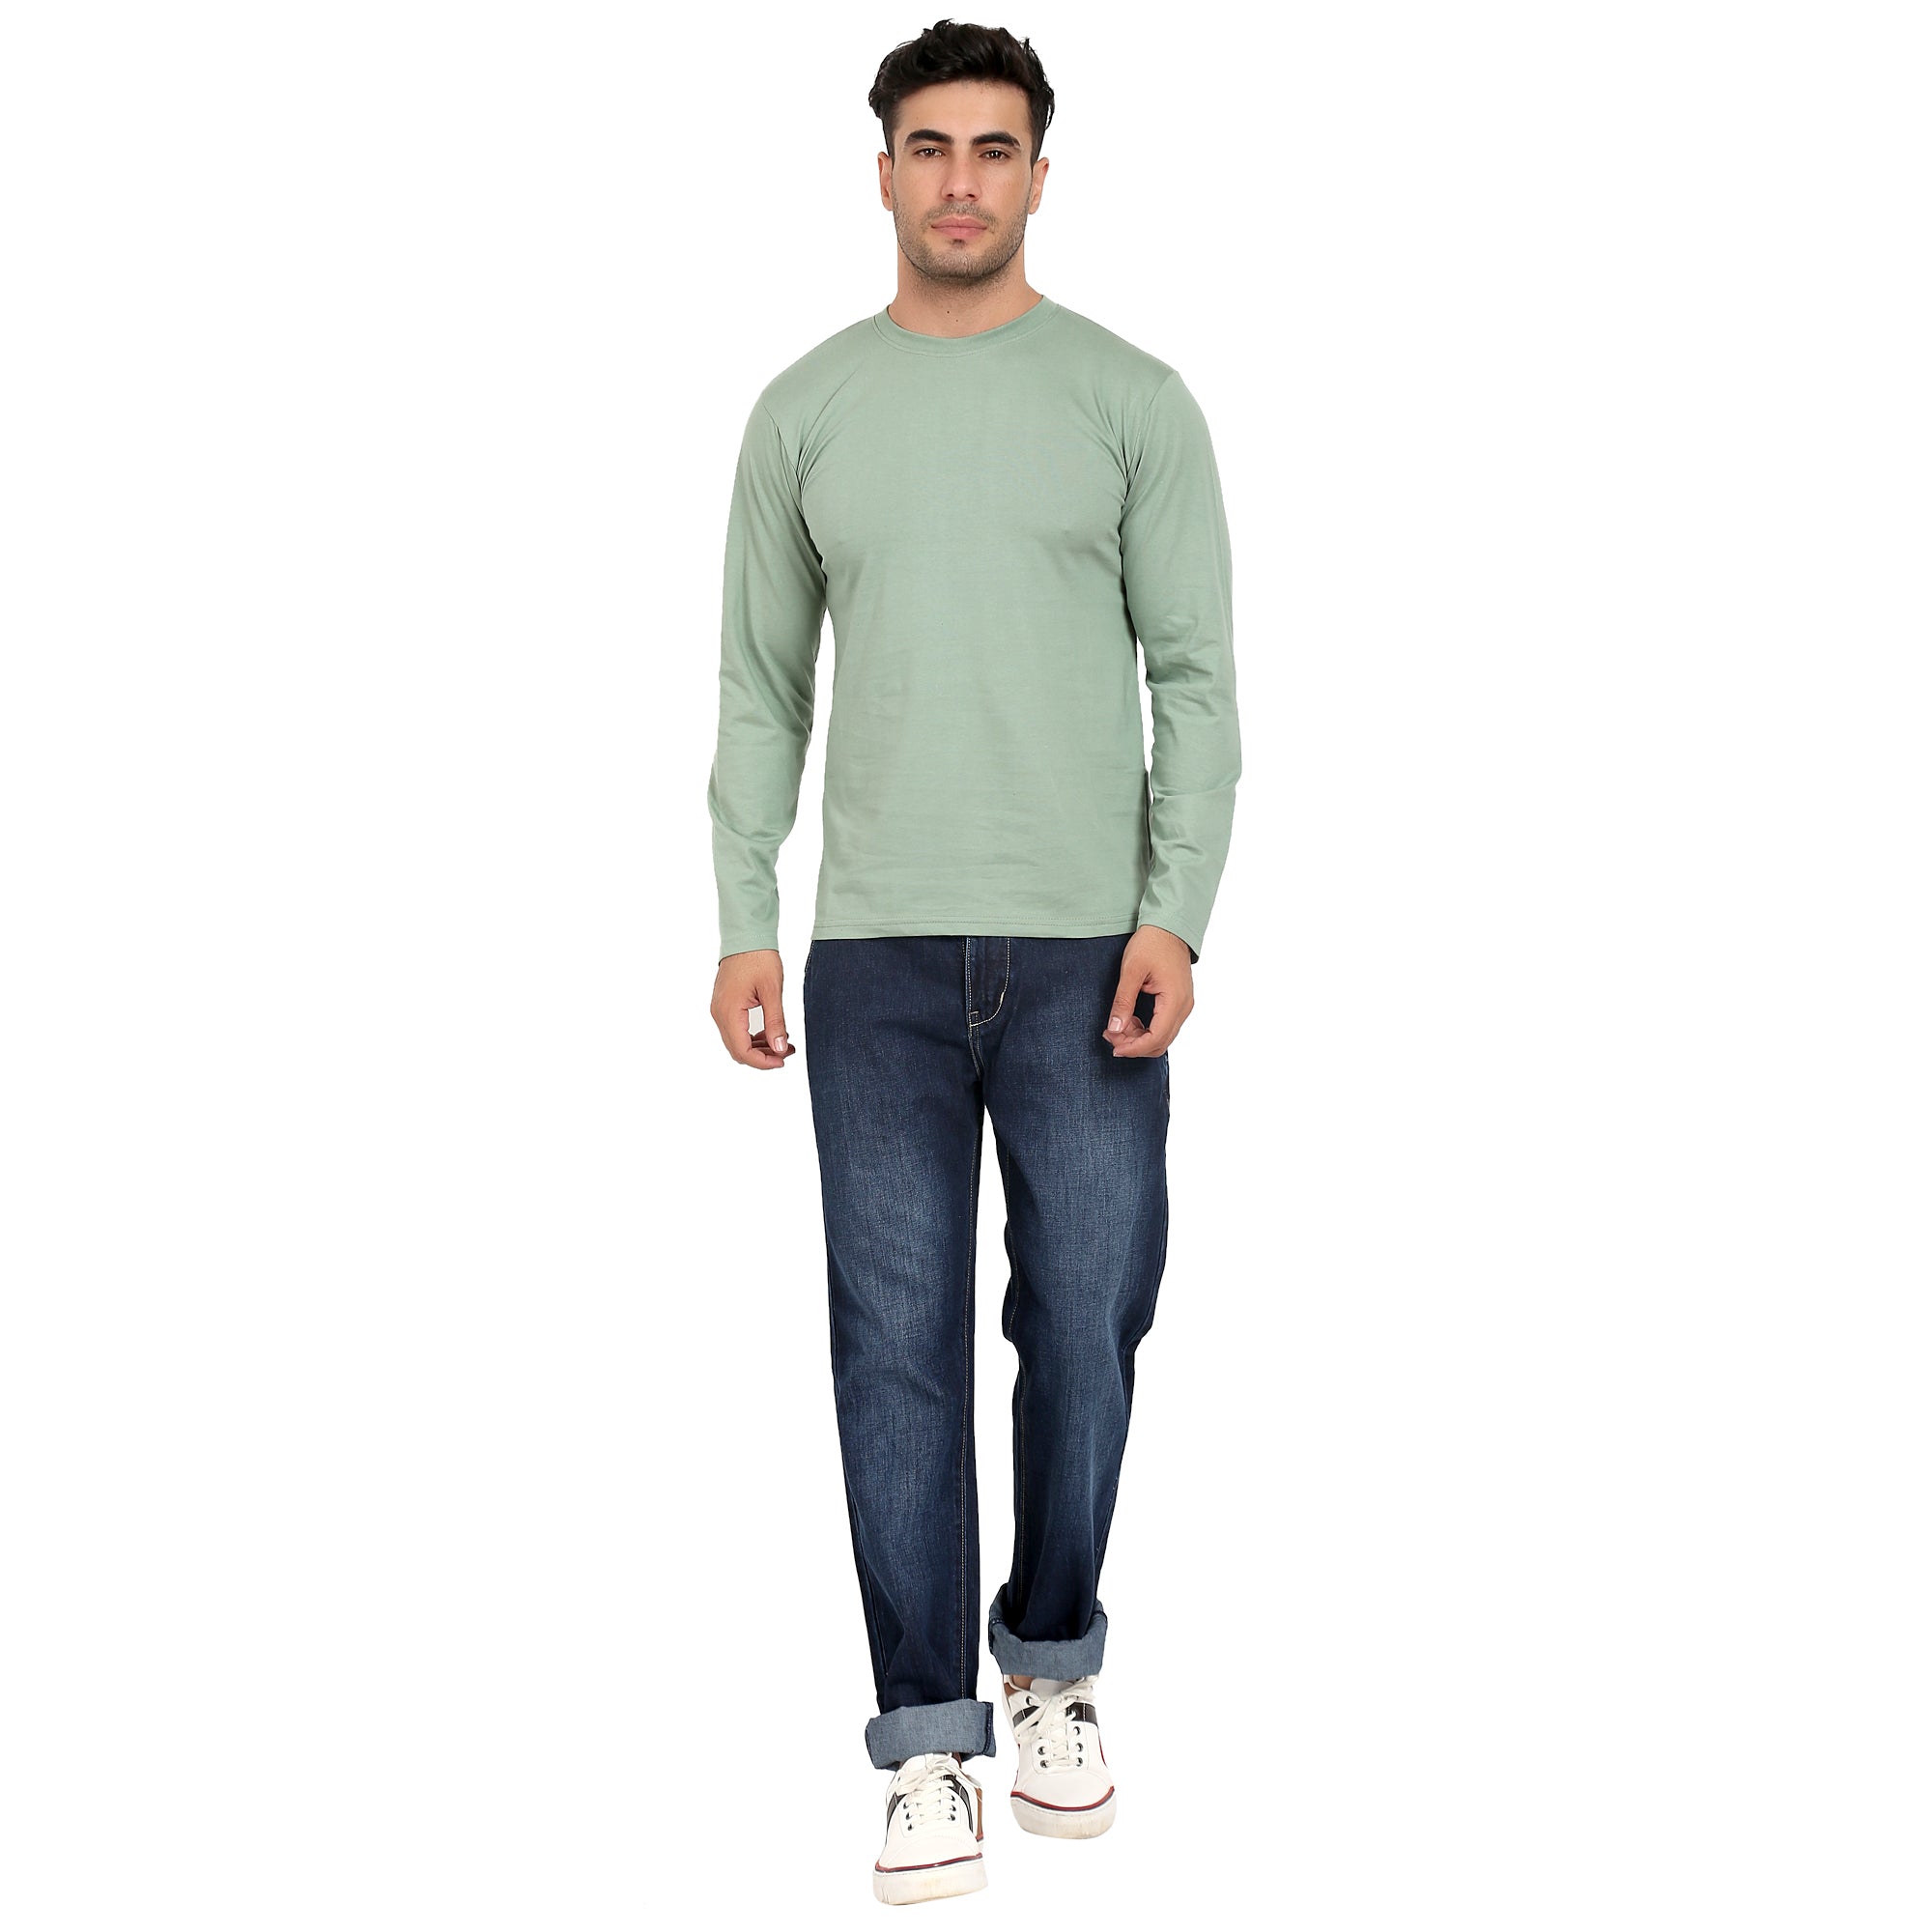 Men Crew Neck Cotton T-Shirts - Full Sleeves, Olive Colour